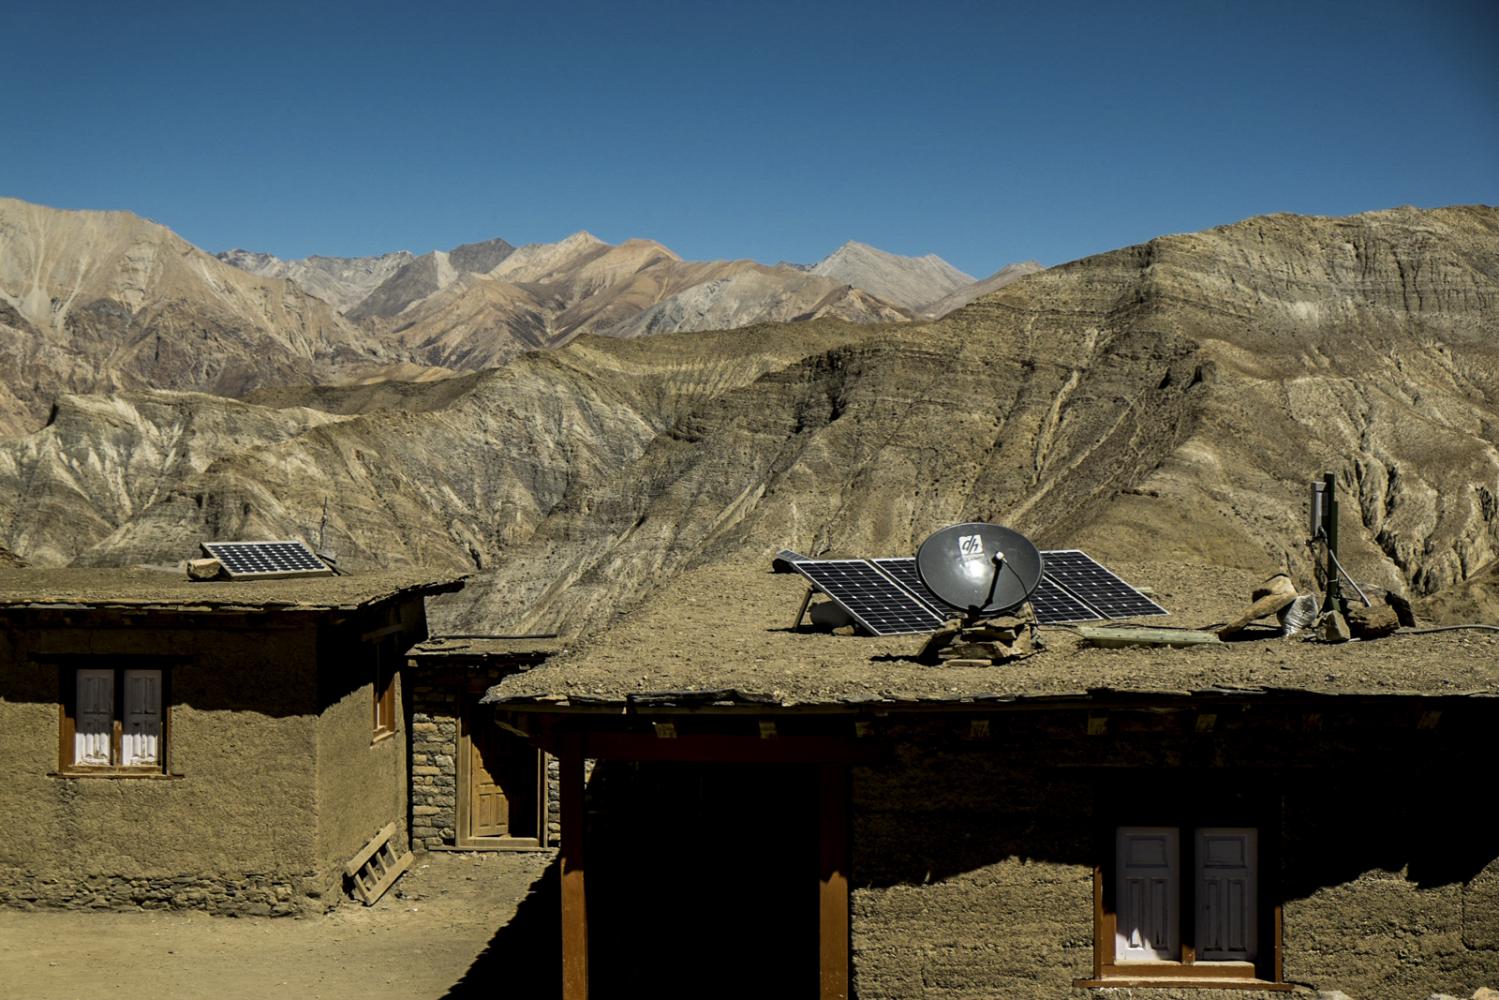 Image from ENVIRONMENT - Nomads Clinic Dolpo Nepal 2015